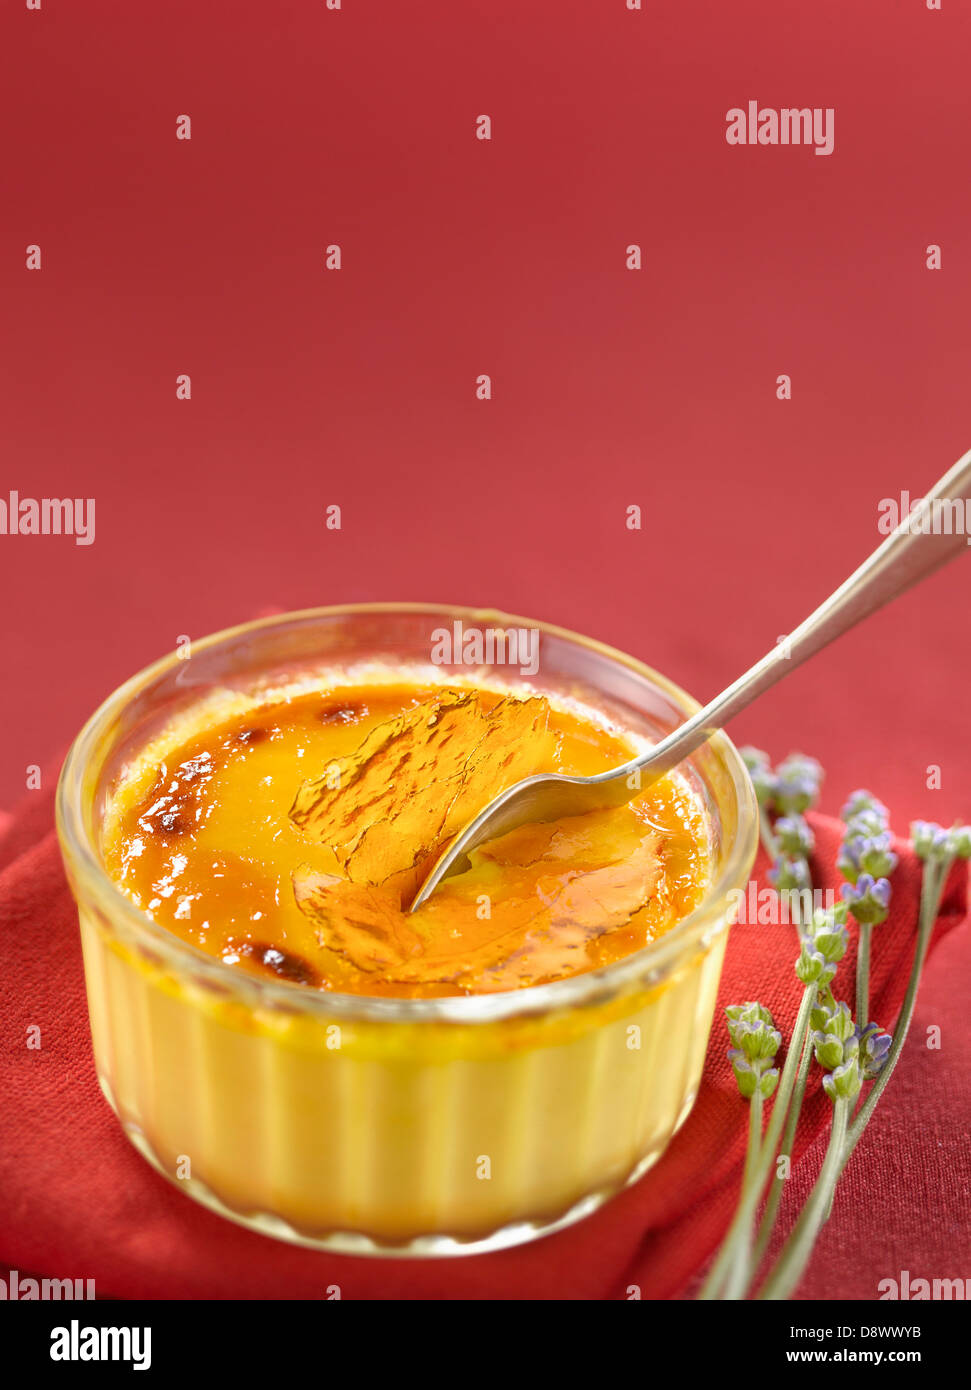 Catalan cream dessert made with a lavander infusion Stock Photo